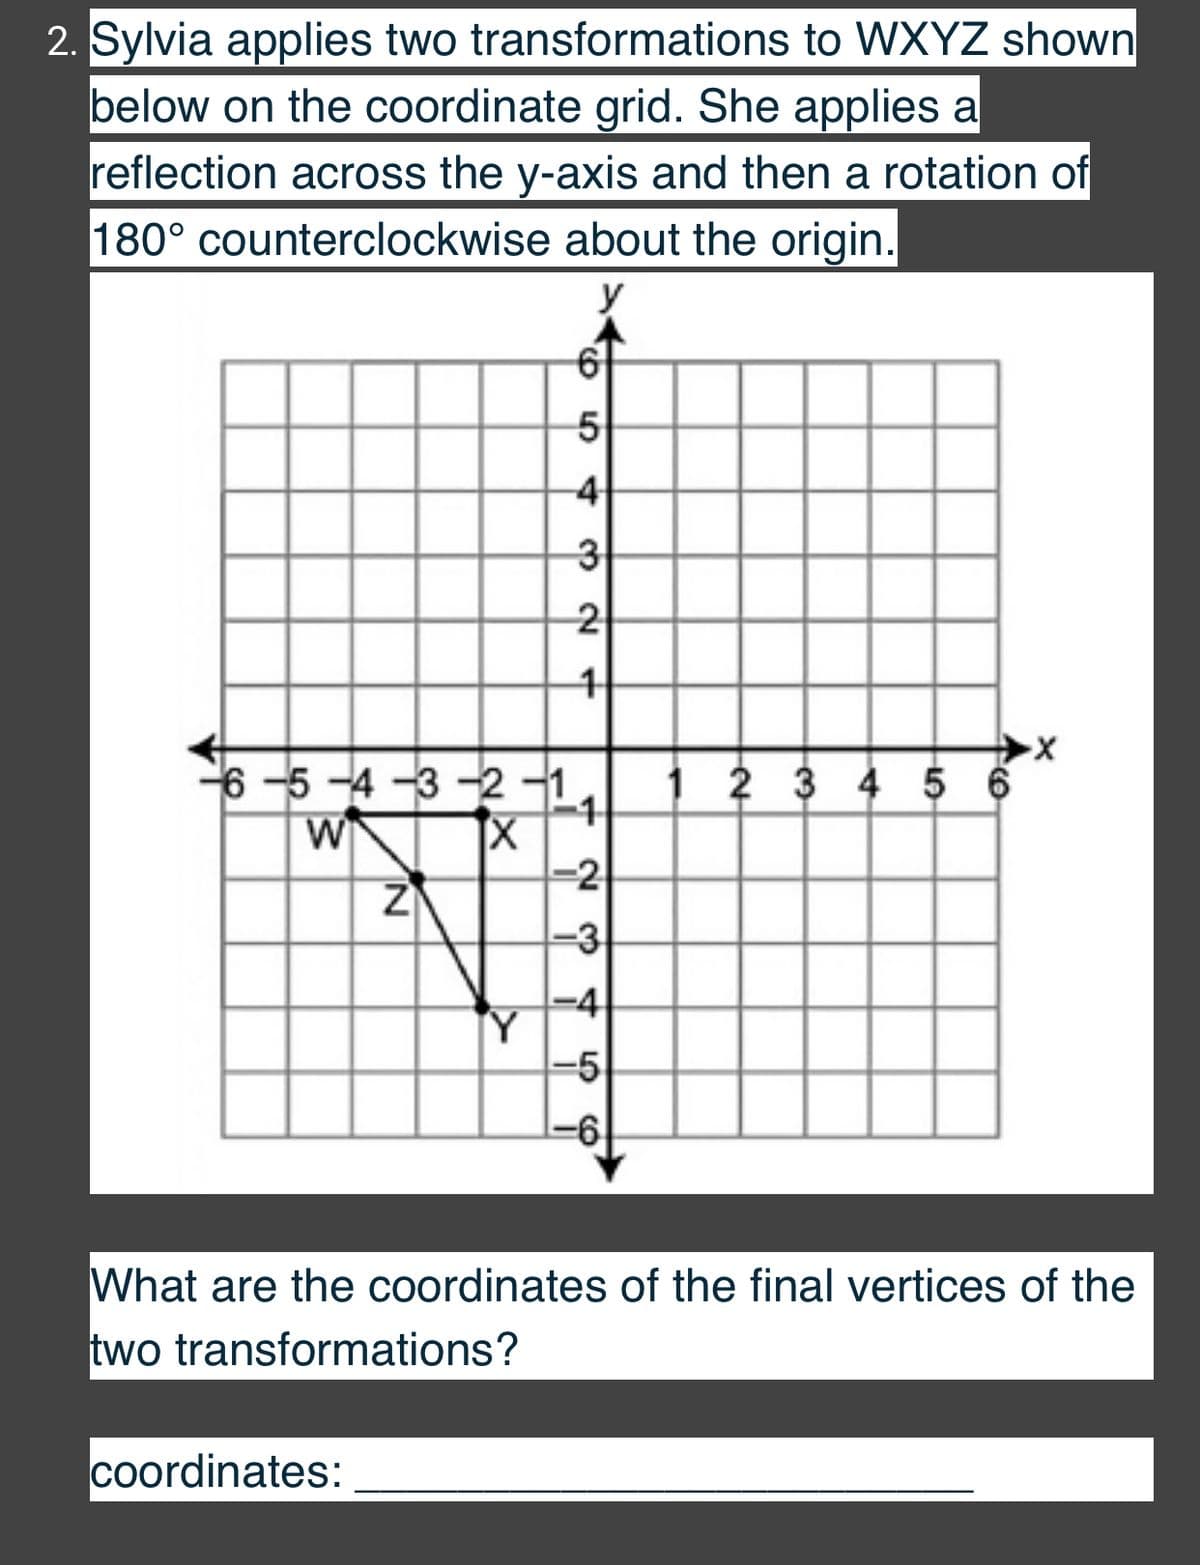 2. Sylvia applies two transformations to WXYZ shown
below on the coordinate grid. She applies a
reflection across the y-axis and then a rotation of
180° counterclockwise about the origin.
y
-4
2
6-5 -4 -3 -2 -1
W
1 2 3 4 5 6
-2
Z
-3
-4
Y
-5
What are the coordinates of the final vertices of the
two transformations?
coordinates:
1.
